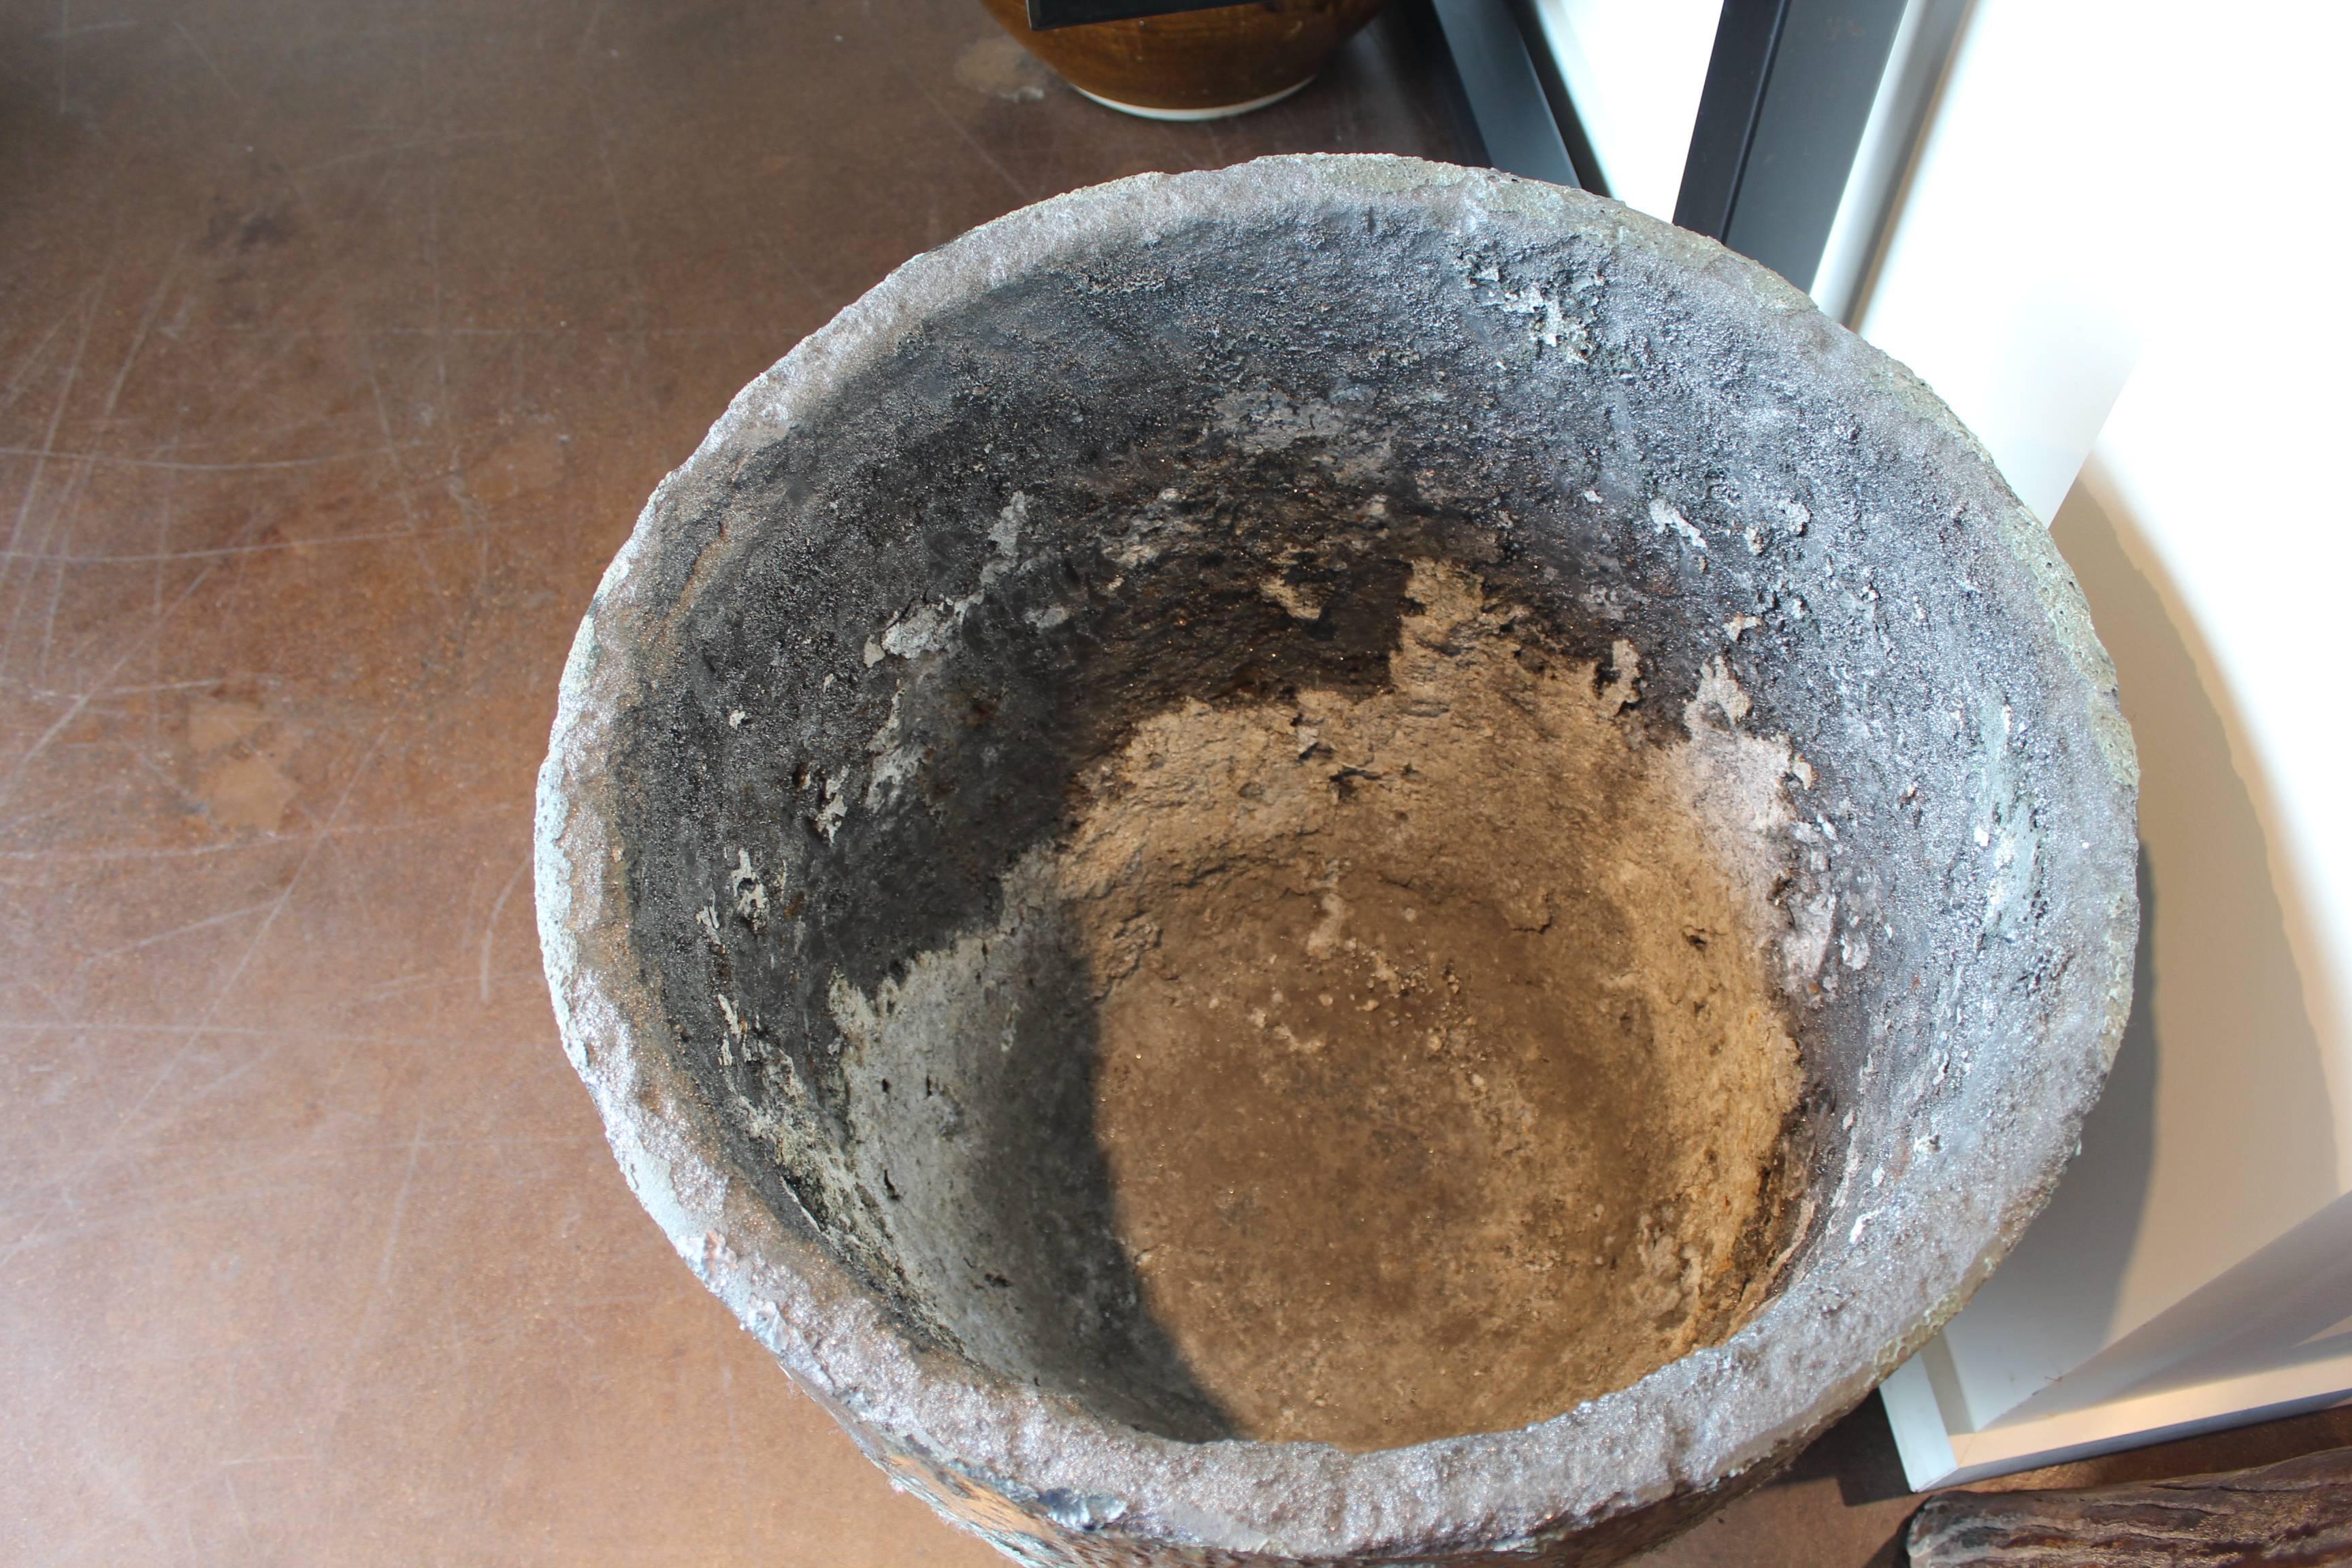 Vintage crucible used in Industry for molten metals. Use could be as side table, or planter. Interior has a 